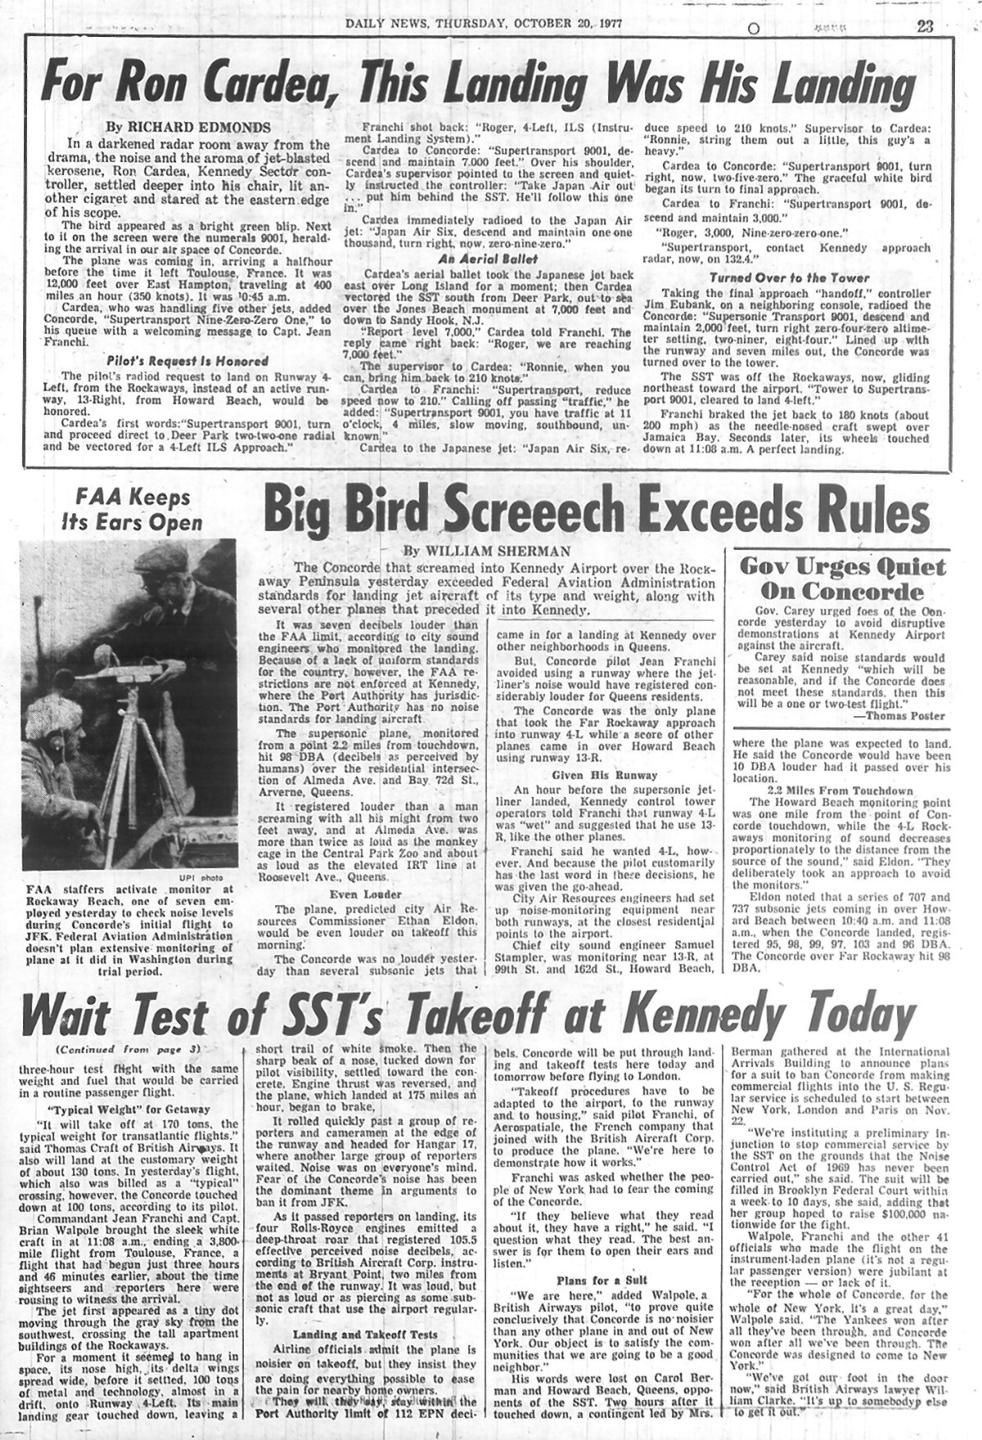 11/1977 ARTICLE 2 PAGES CONCORDE SUPERSONIC AIRLINER JFK AIRPORT NEW YORK 